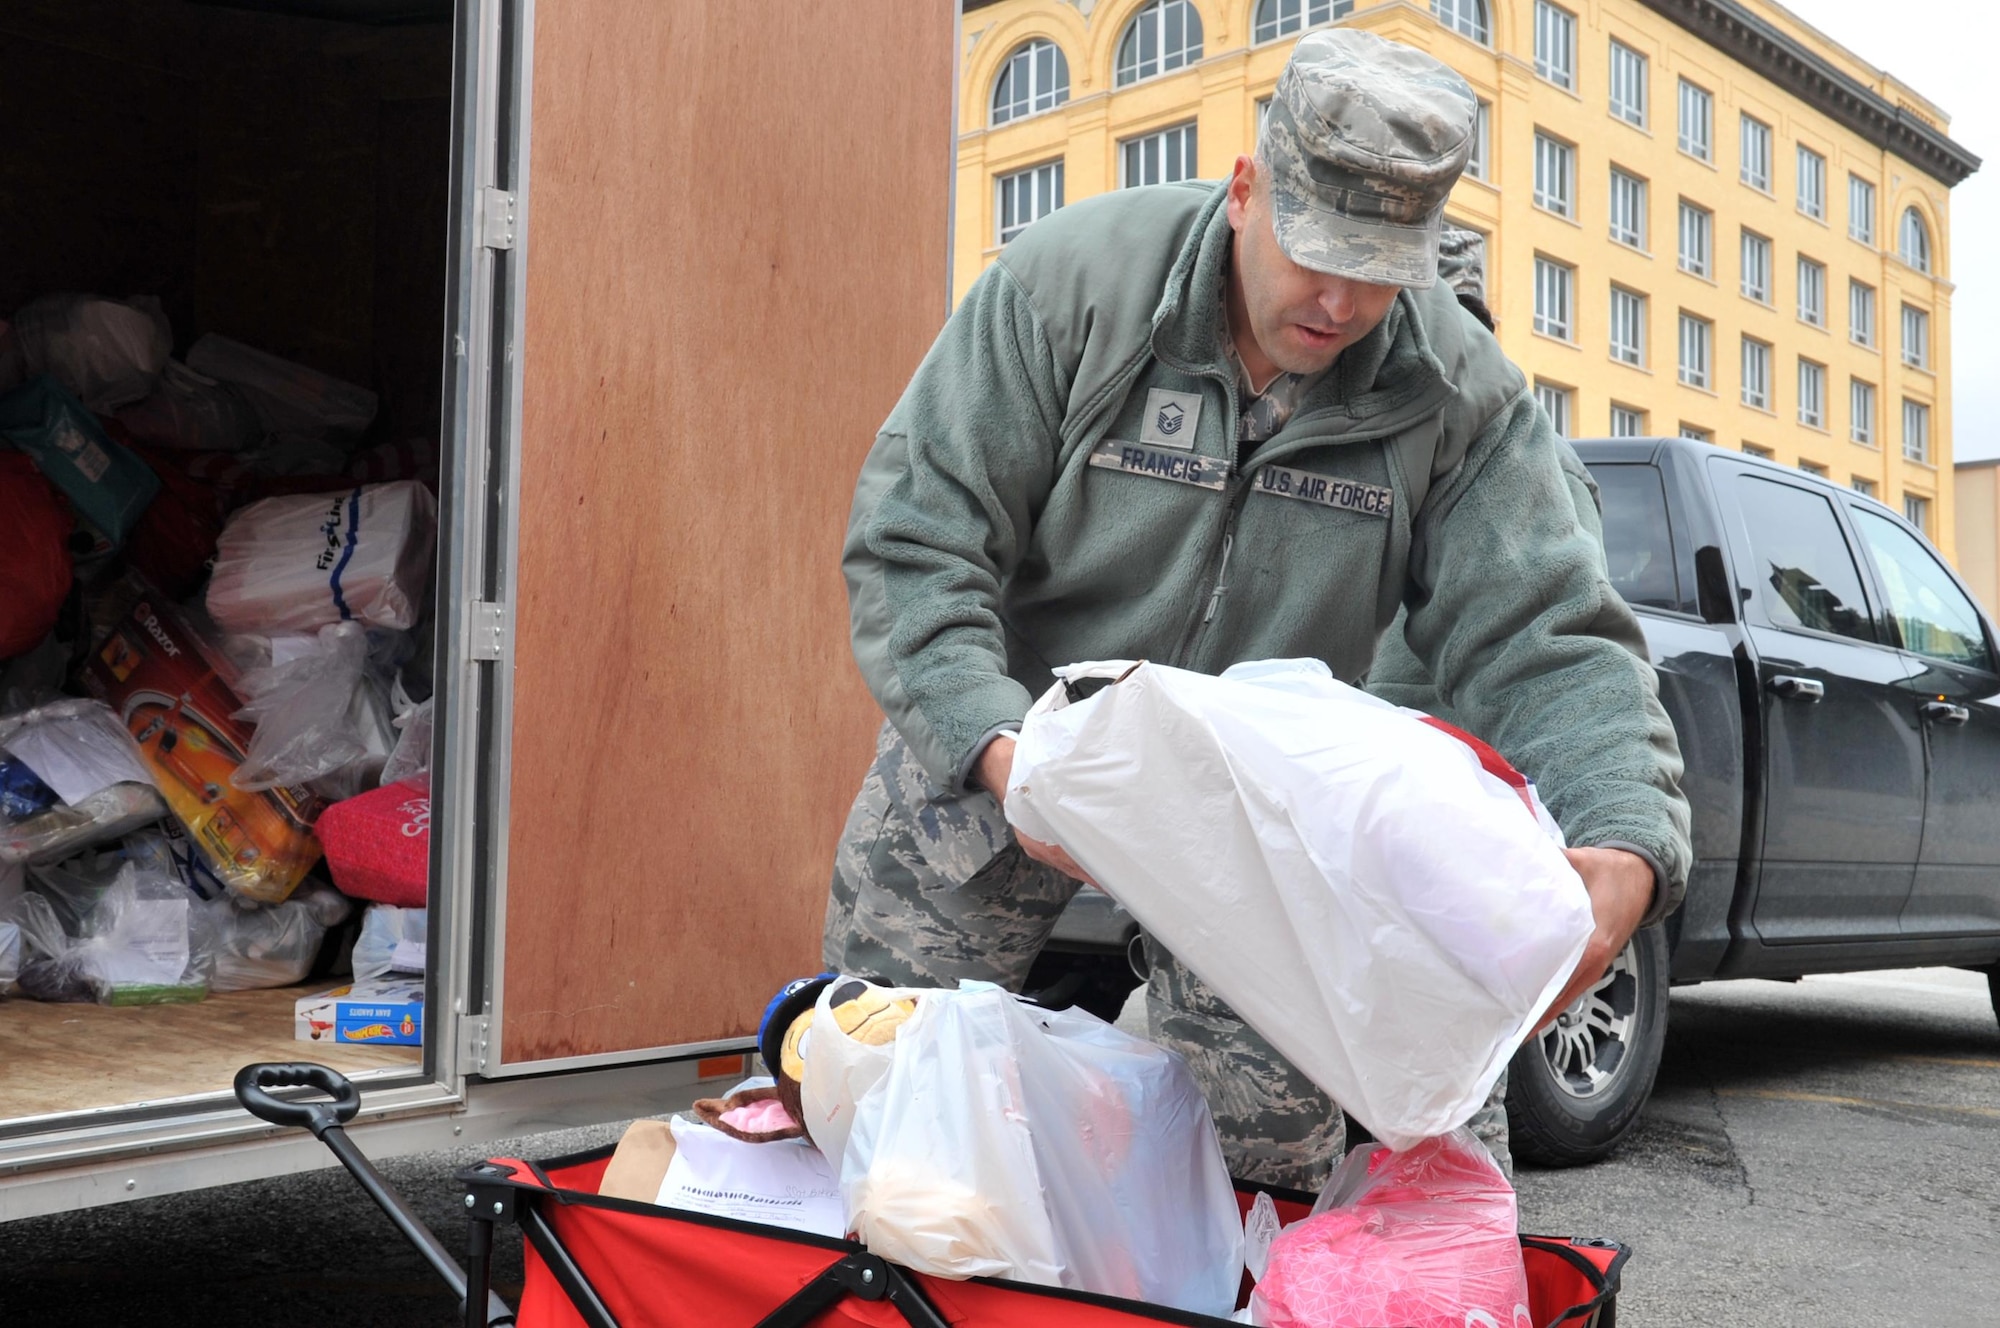 U.S. Air Force Master Sgt. Christopher Francis, 17th Contracting Squadron superintendent, loads toys into a wagon during delivery to the Court Appointed Special Advocates for Children center in San Angelo, Texas, Dec. 8, 2016. The toys are for children in emergency foster care. (U.S. Air Force photo by Staff Sgt. Laura R. McFarlane/Released)